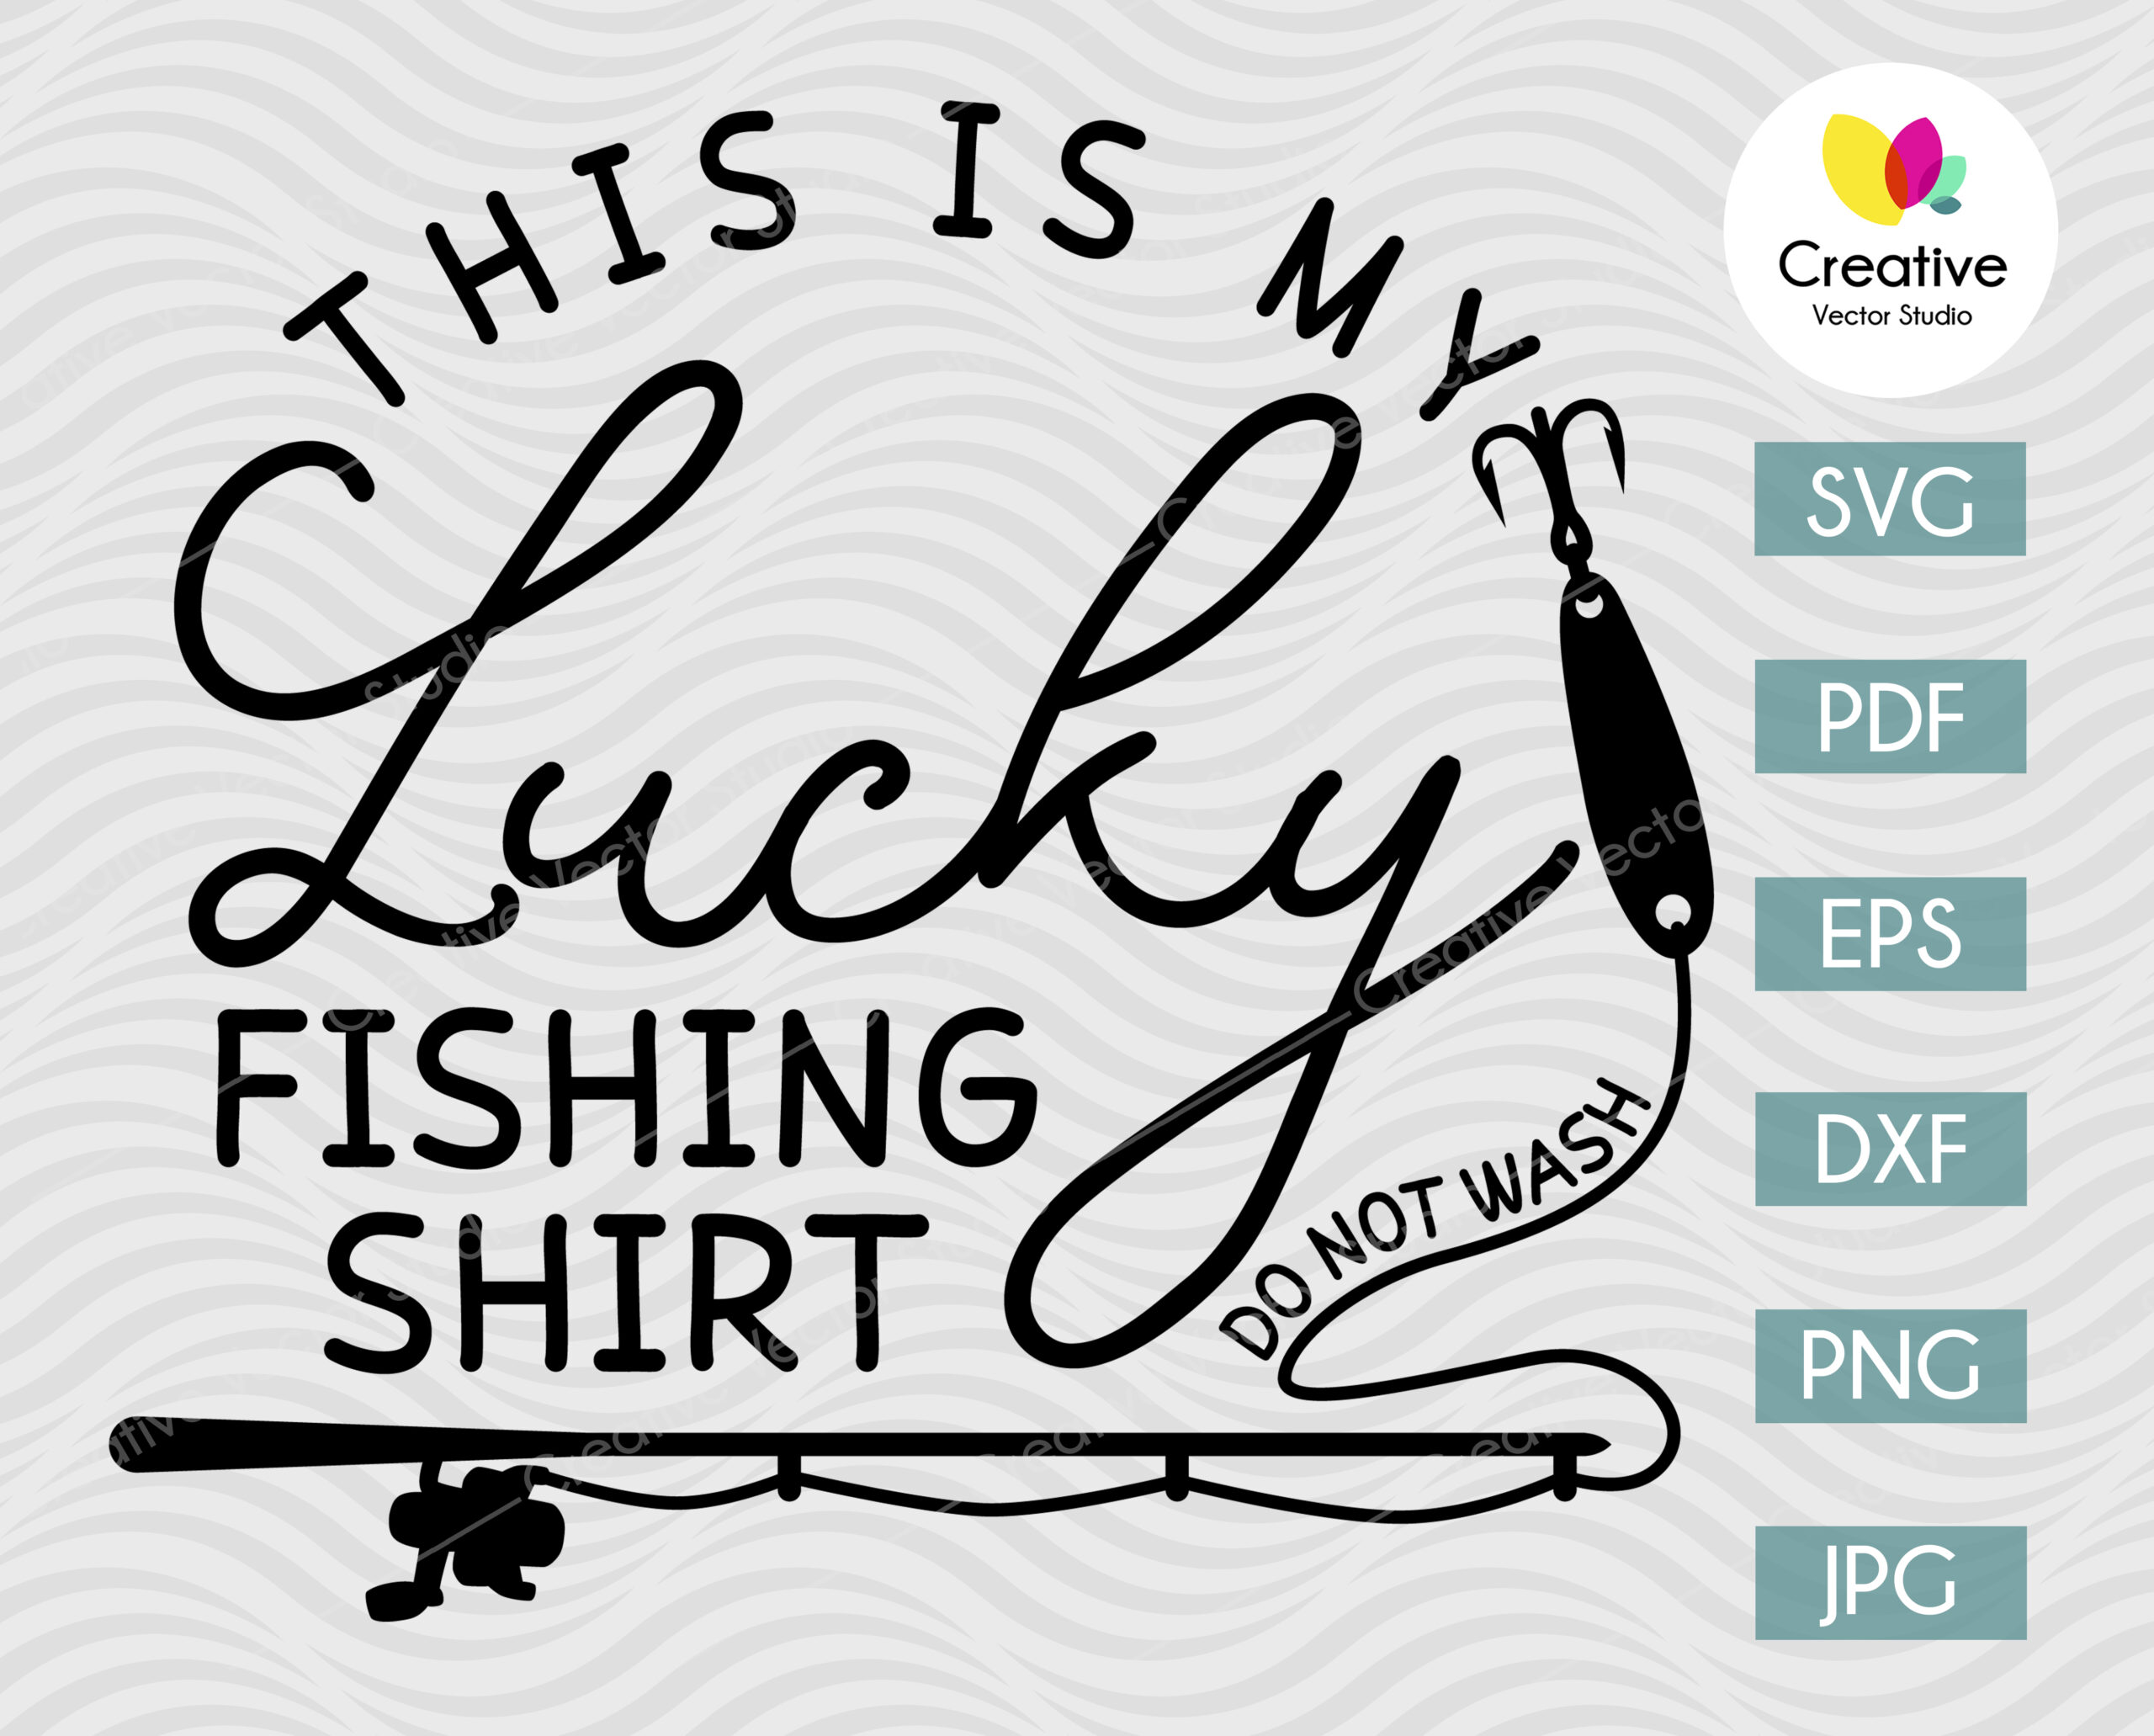 Lucky Fishing Shirt Do Not Wash, T-Shirt Gift Men's Funny Fishing t shirts  design, Vector graphic, typographic poster or t-shirt. 16625680 Vector Art  at Vecteezy